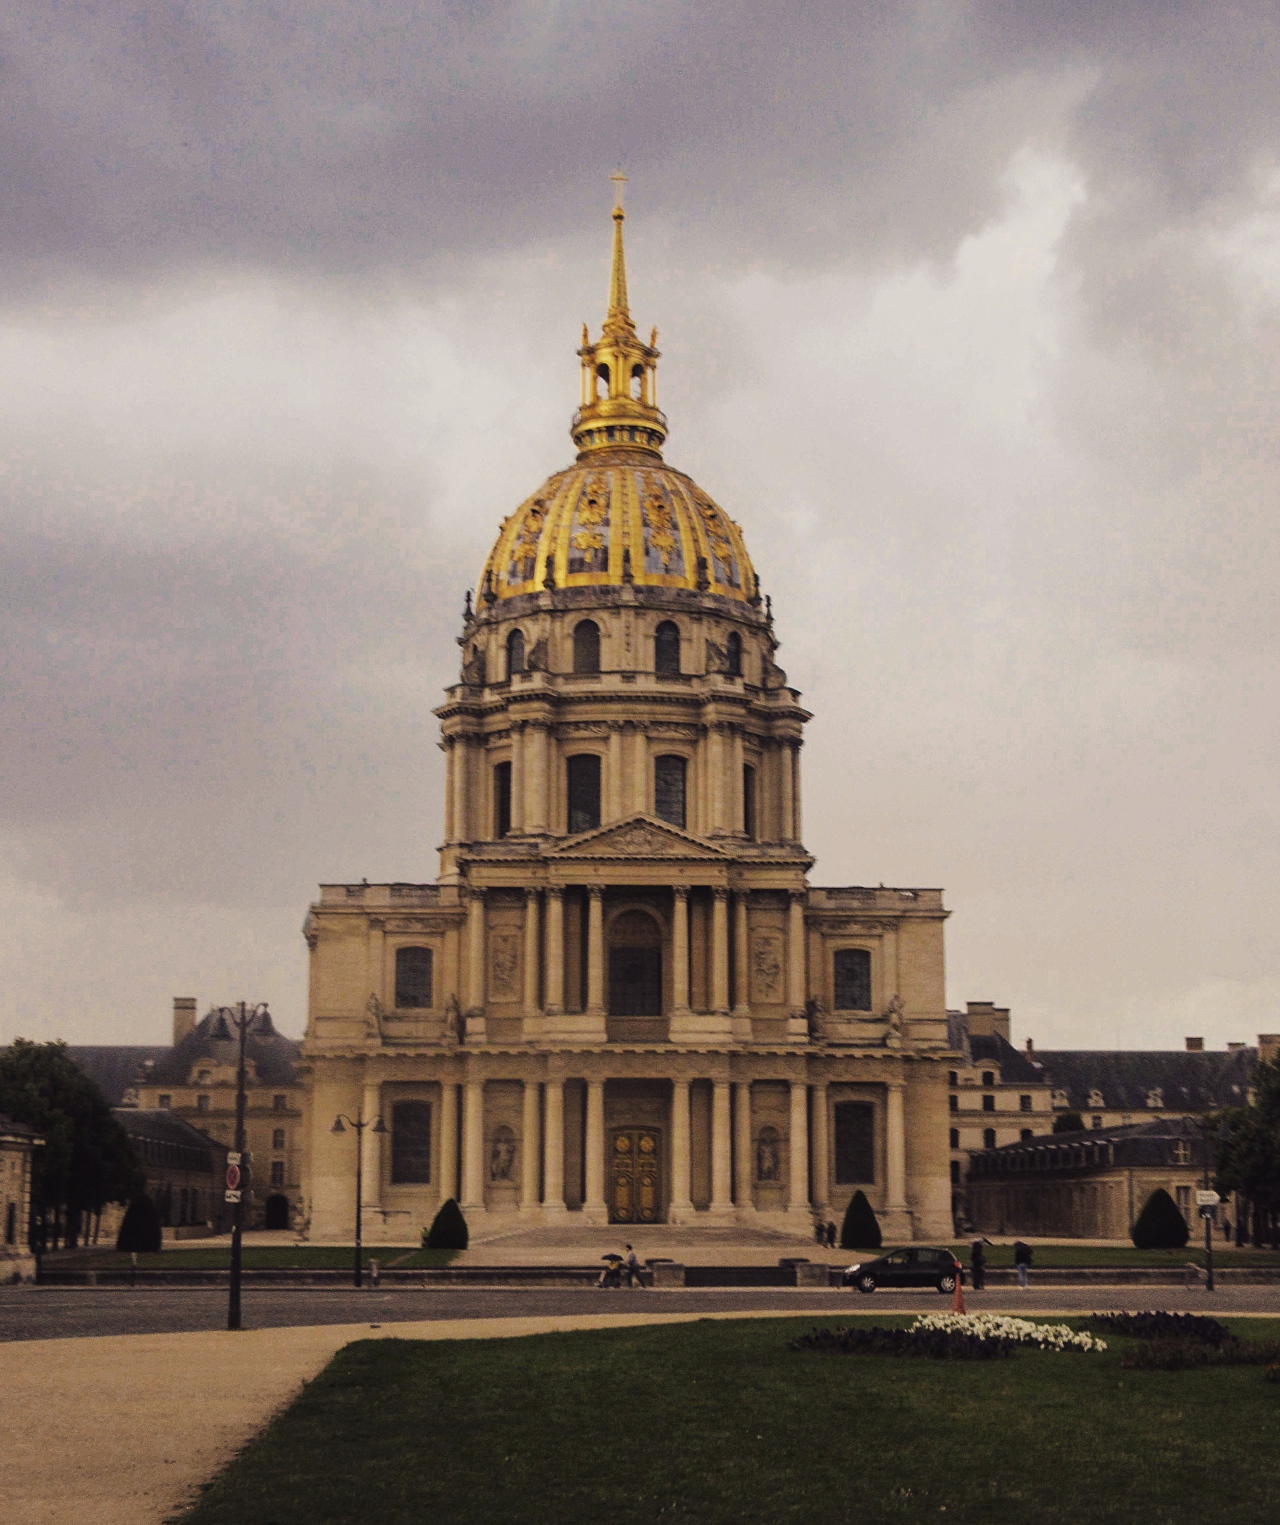 Les Invalides: A day in the footsteps of Napoleon